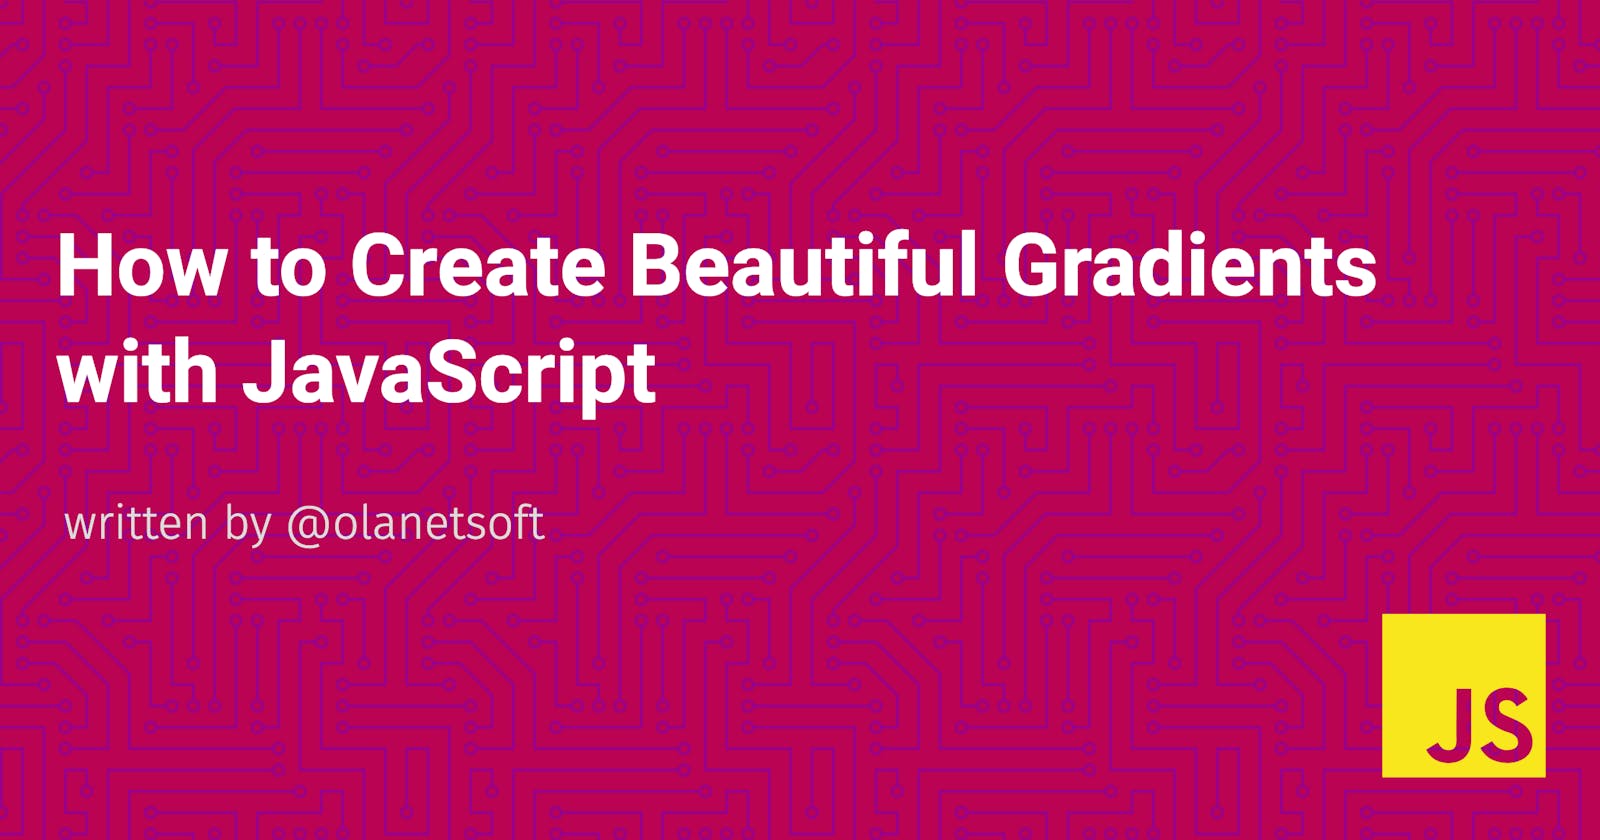 How to Create Beautiful Gradients with JavaScript